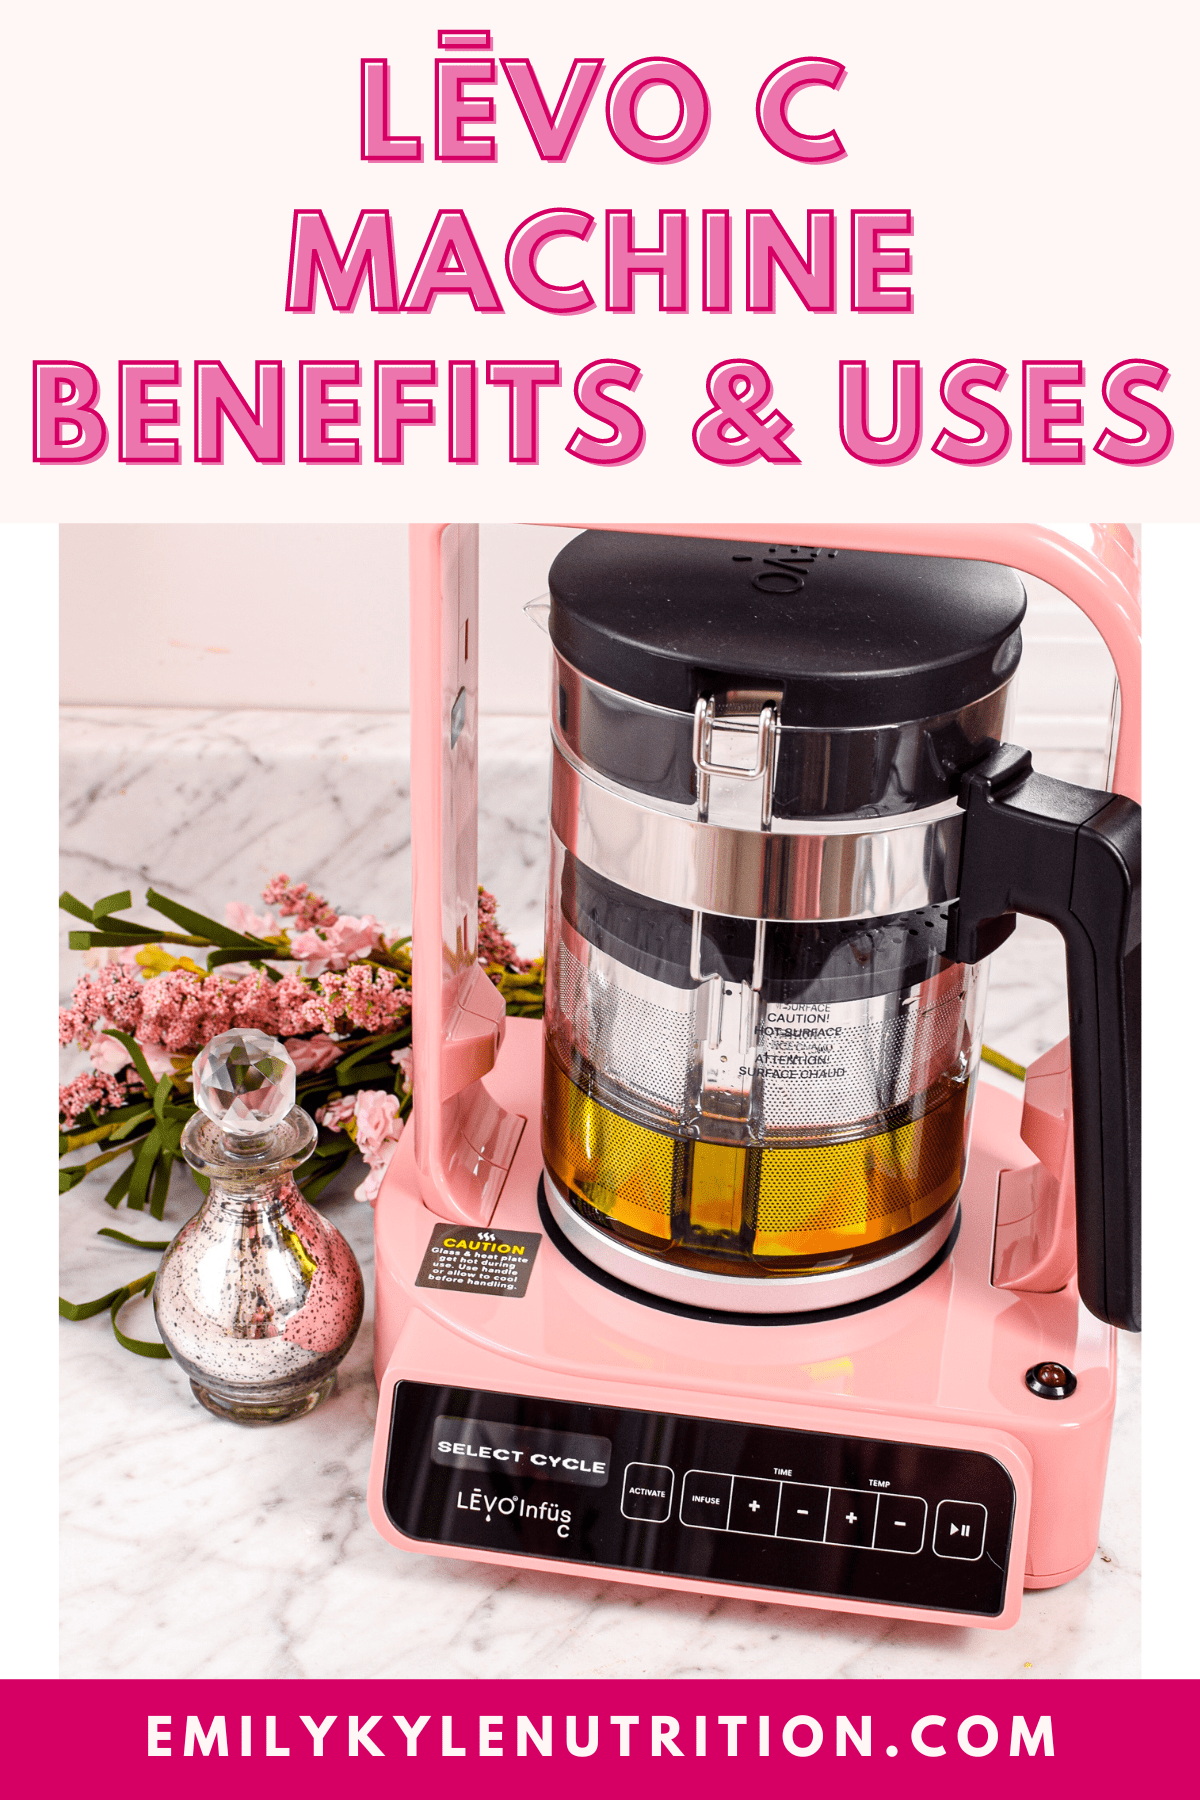 A picture of a pink LEVO machine with text that says LĒVO C Machine Benefits & Uses.